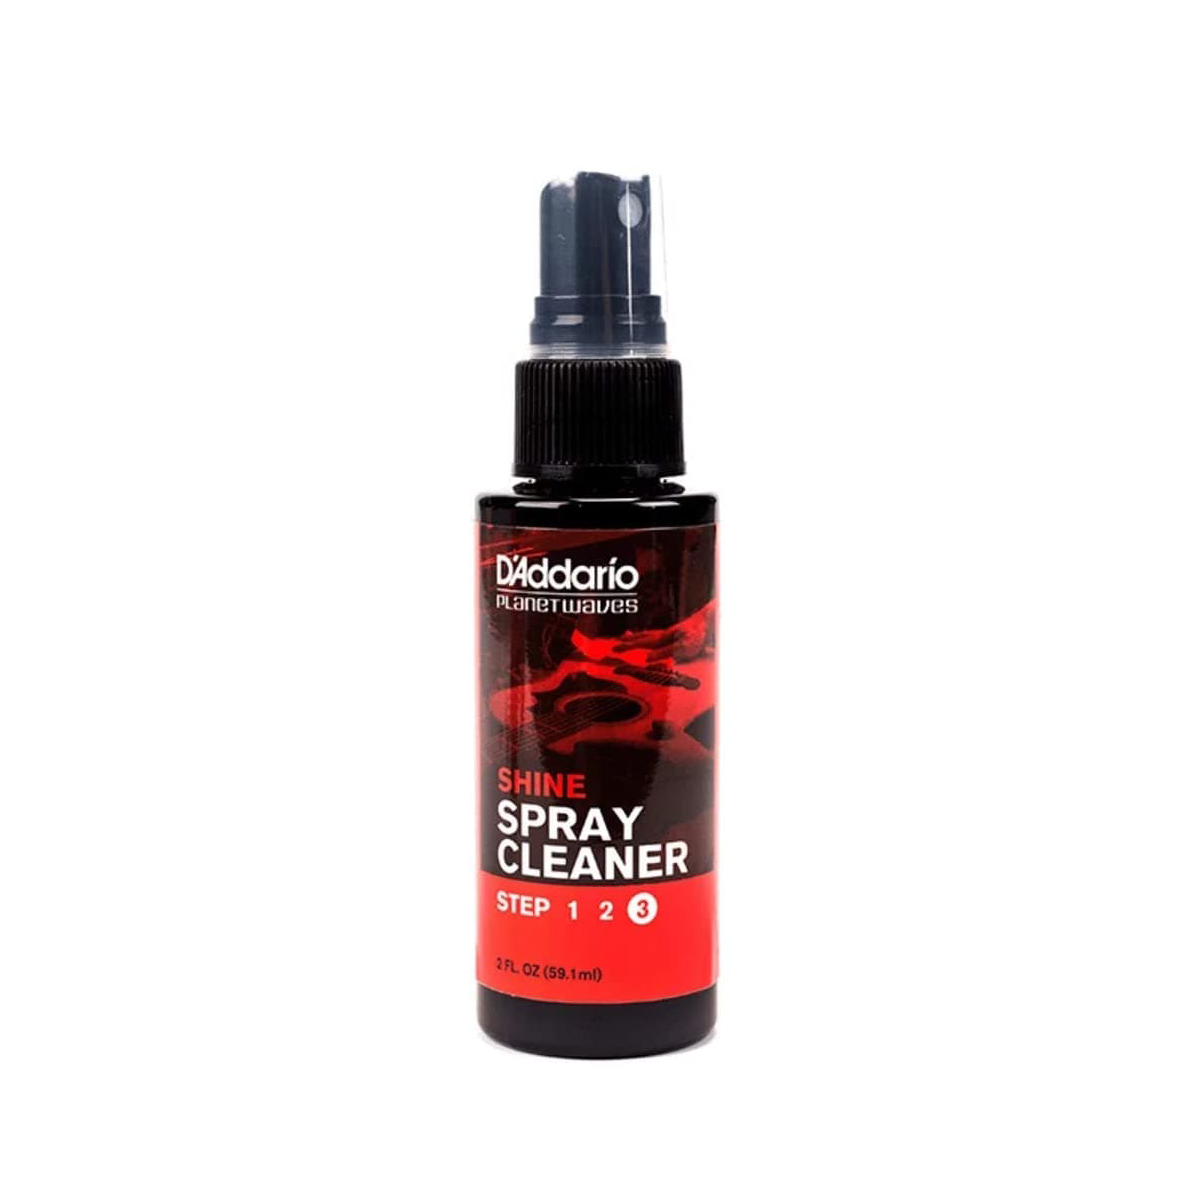 D'Addario Shine Spray Cleaner and Maintainer Small Bottle